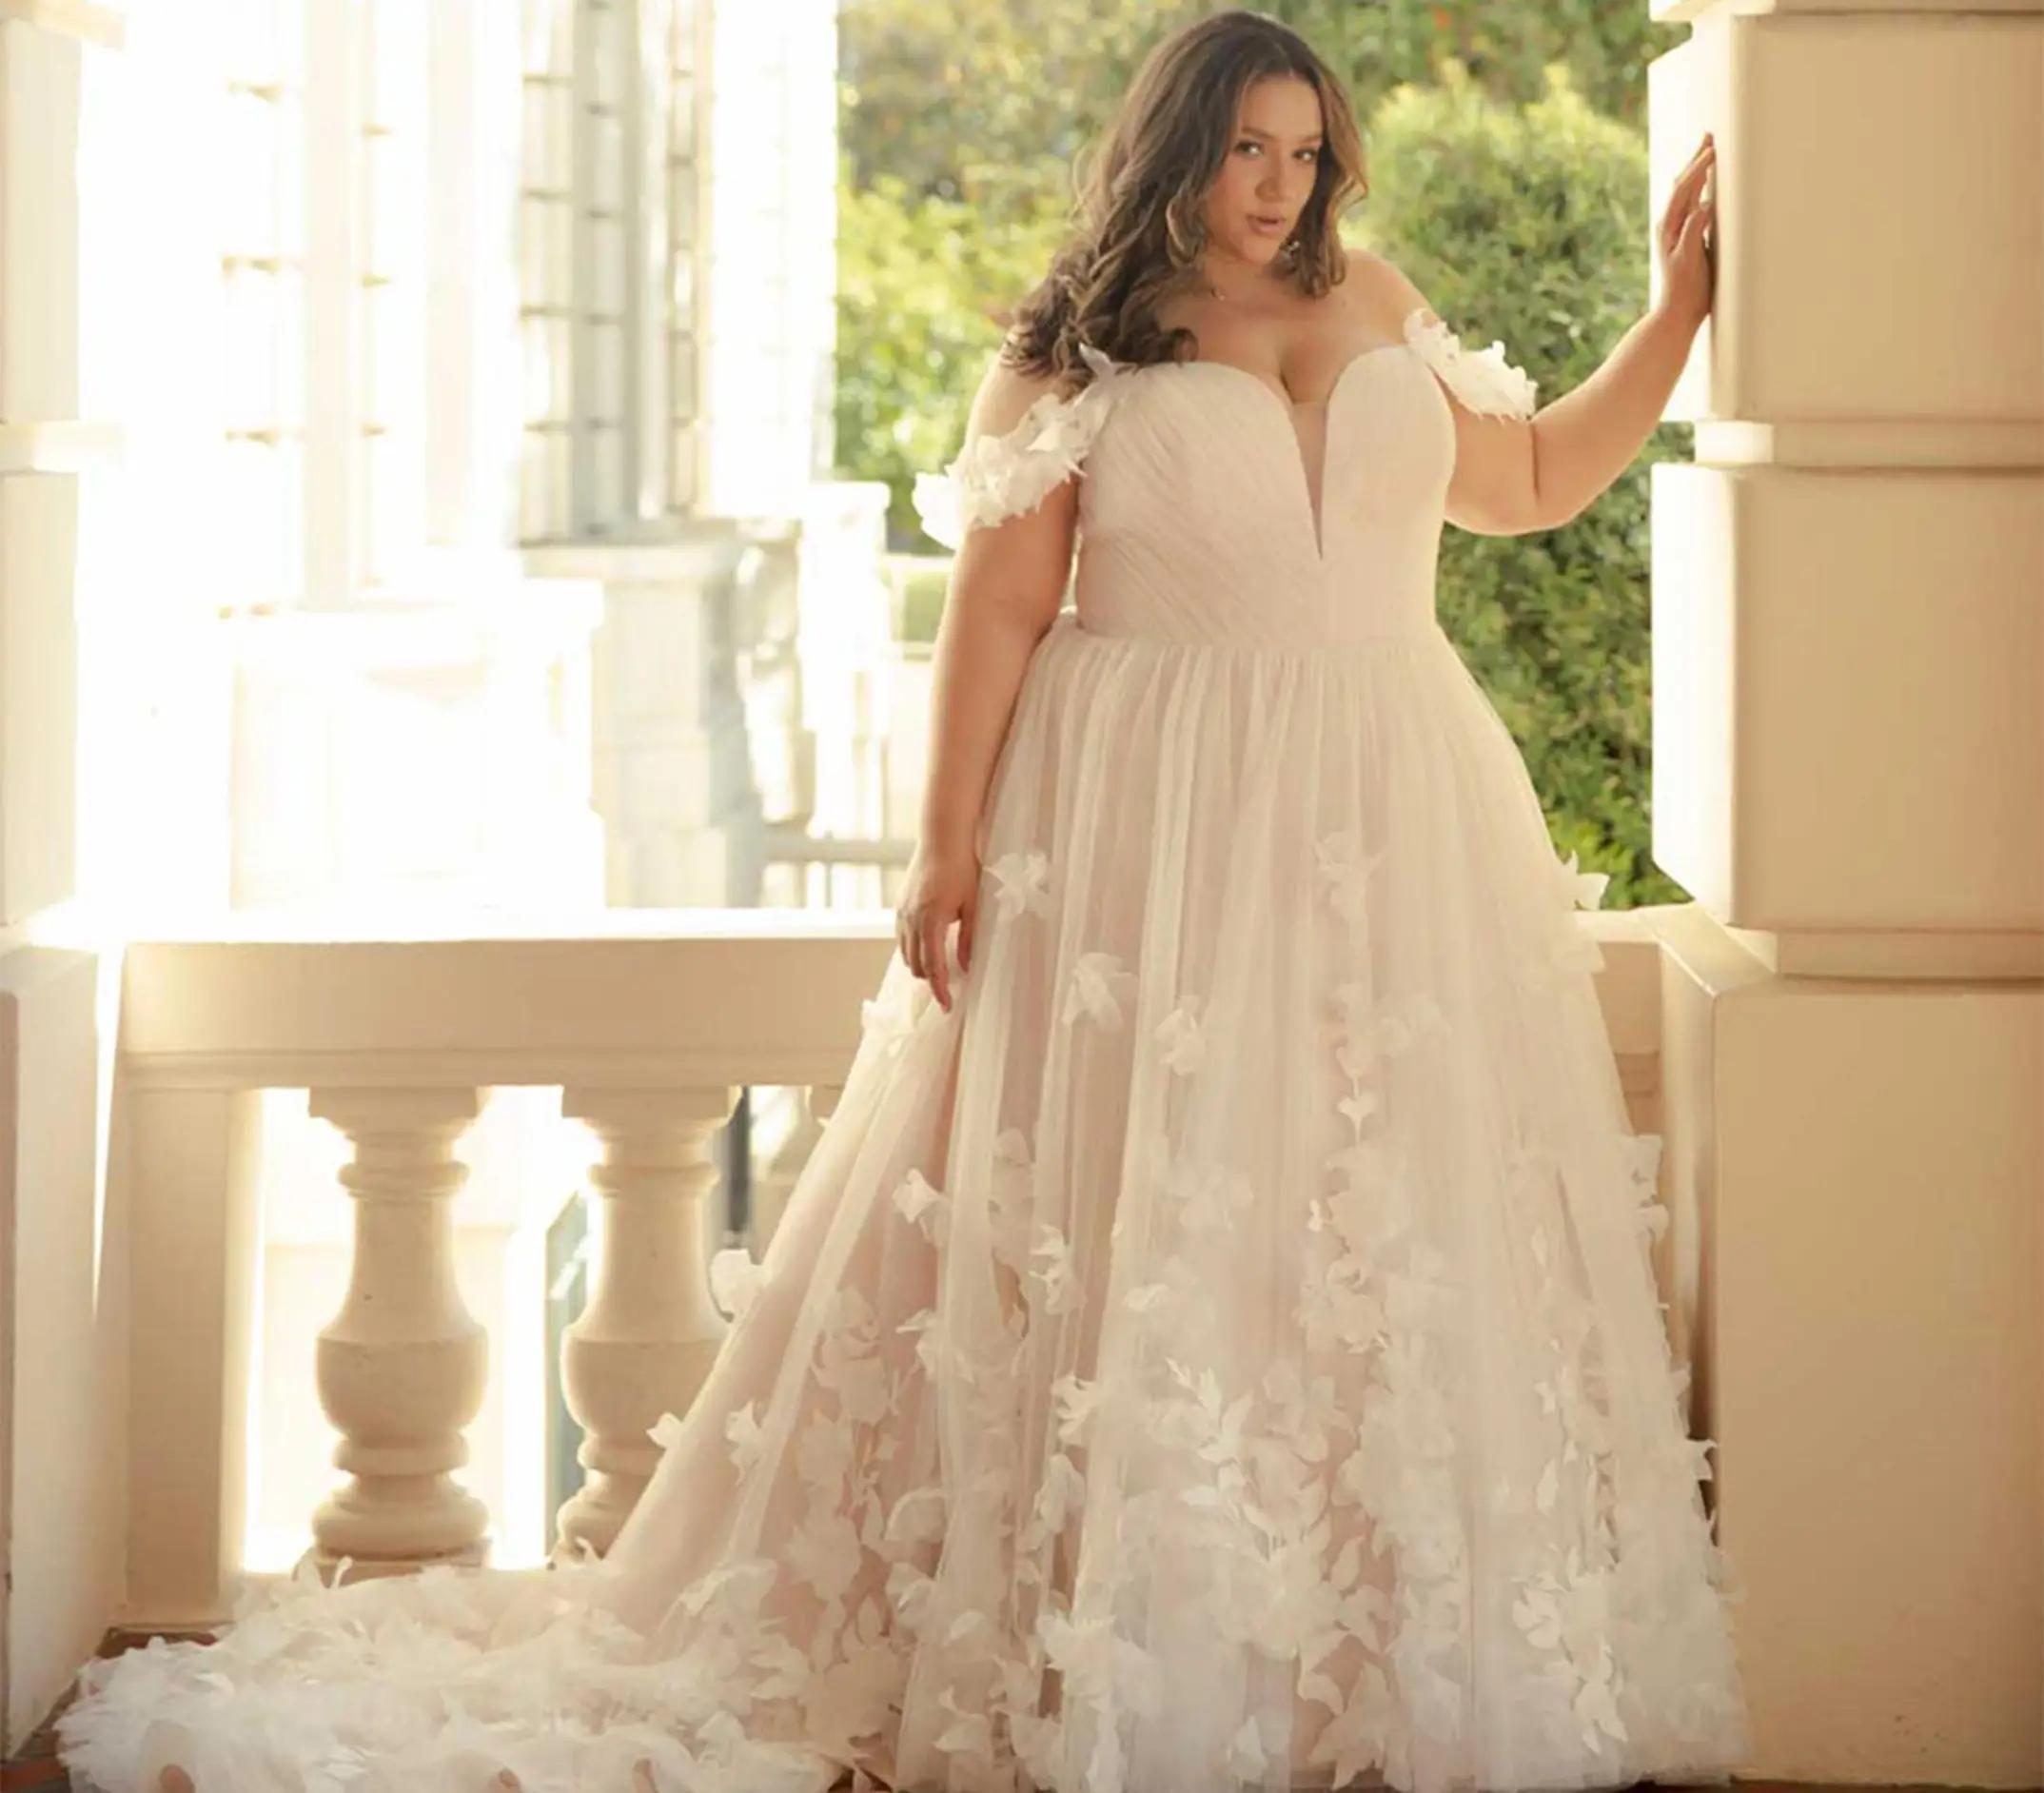 Photo of a plus-size bride in a white gown